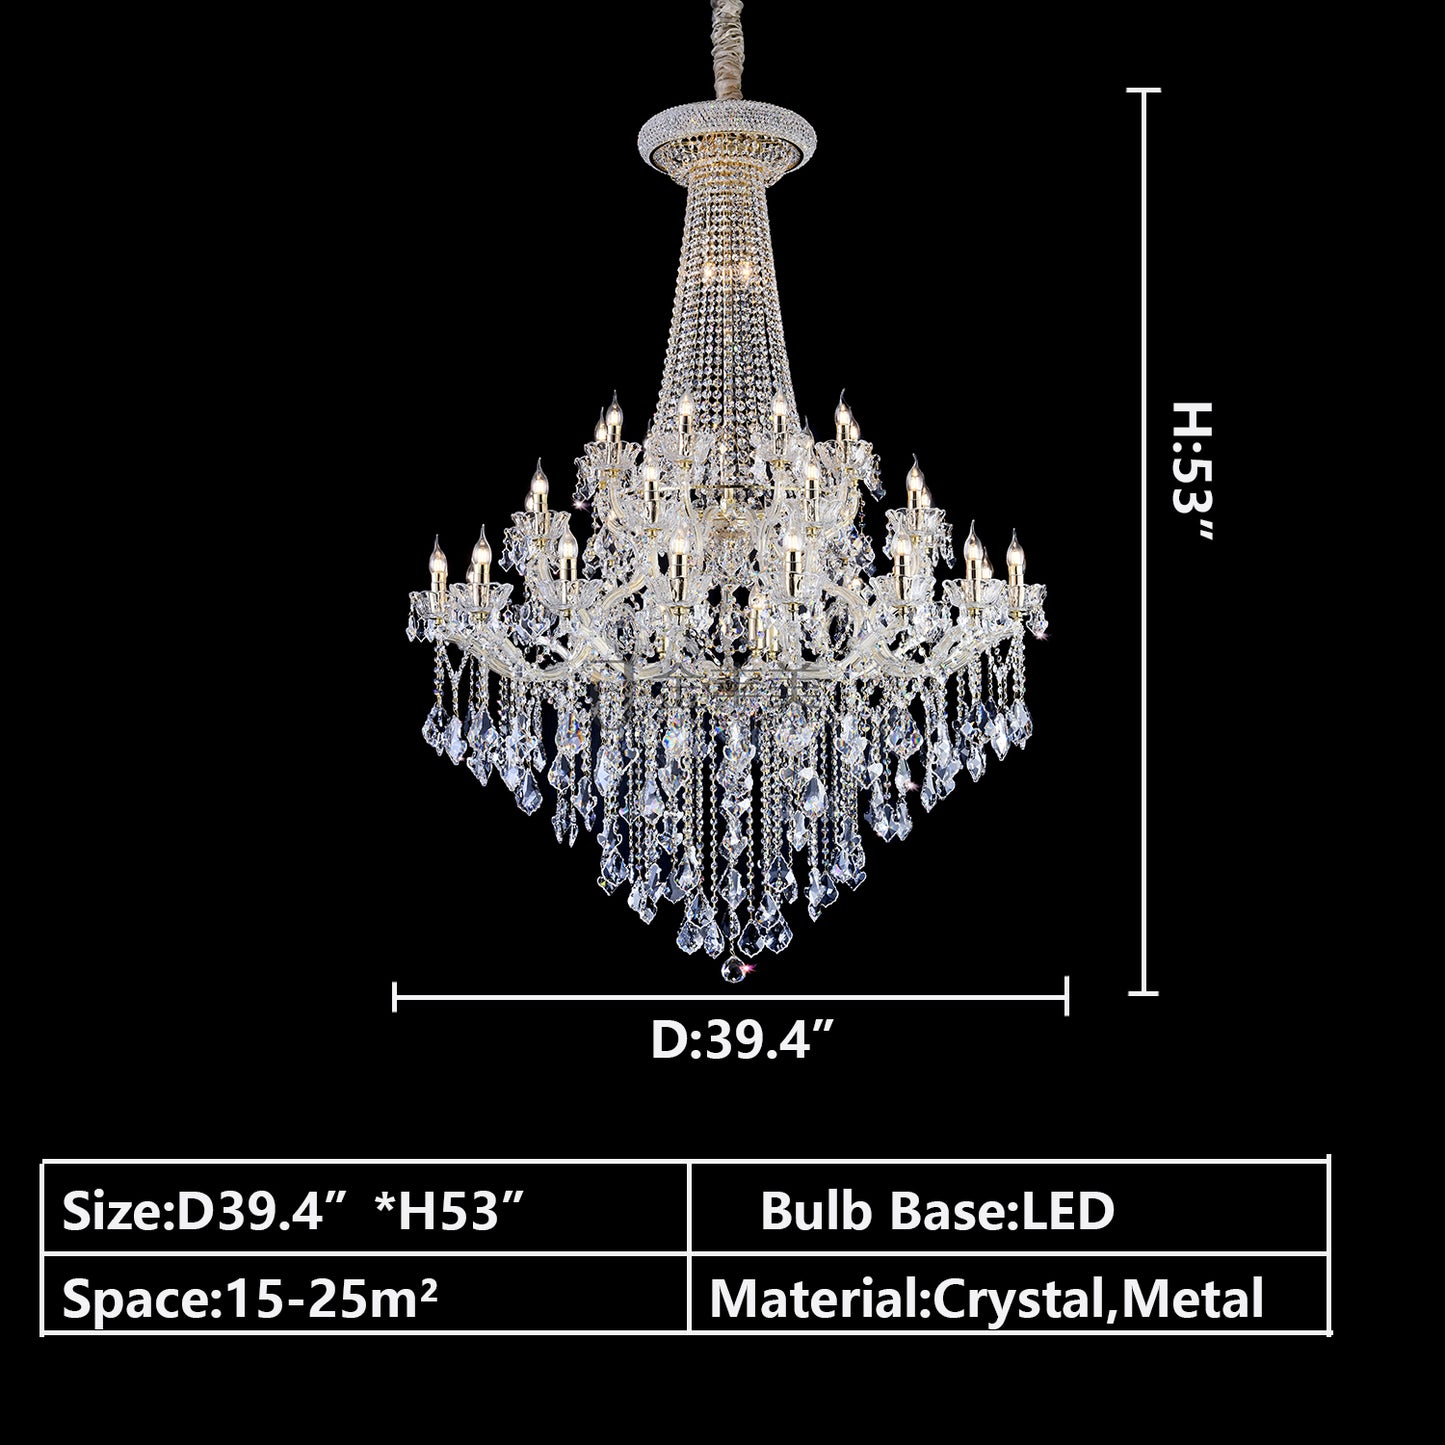 D39.4"*H53.0" chandelier,chandeliers,pendant,crystal,metal,clear crystal,candle,branch,round,raindrop,teardrop,extra large,oversized,large,huge,big,round,living room,luxury,dining room,modern,foyer,stairs,hallway,entrys,hotel lobby,duplex hall,loft